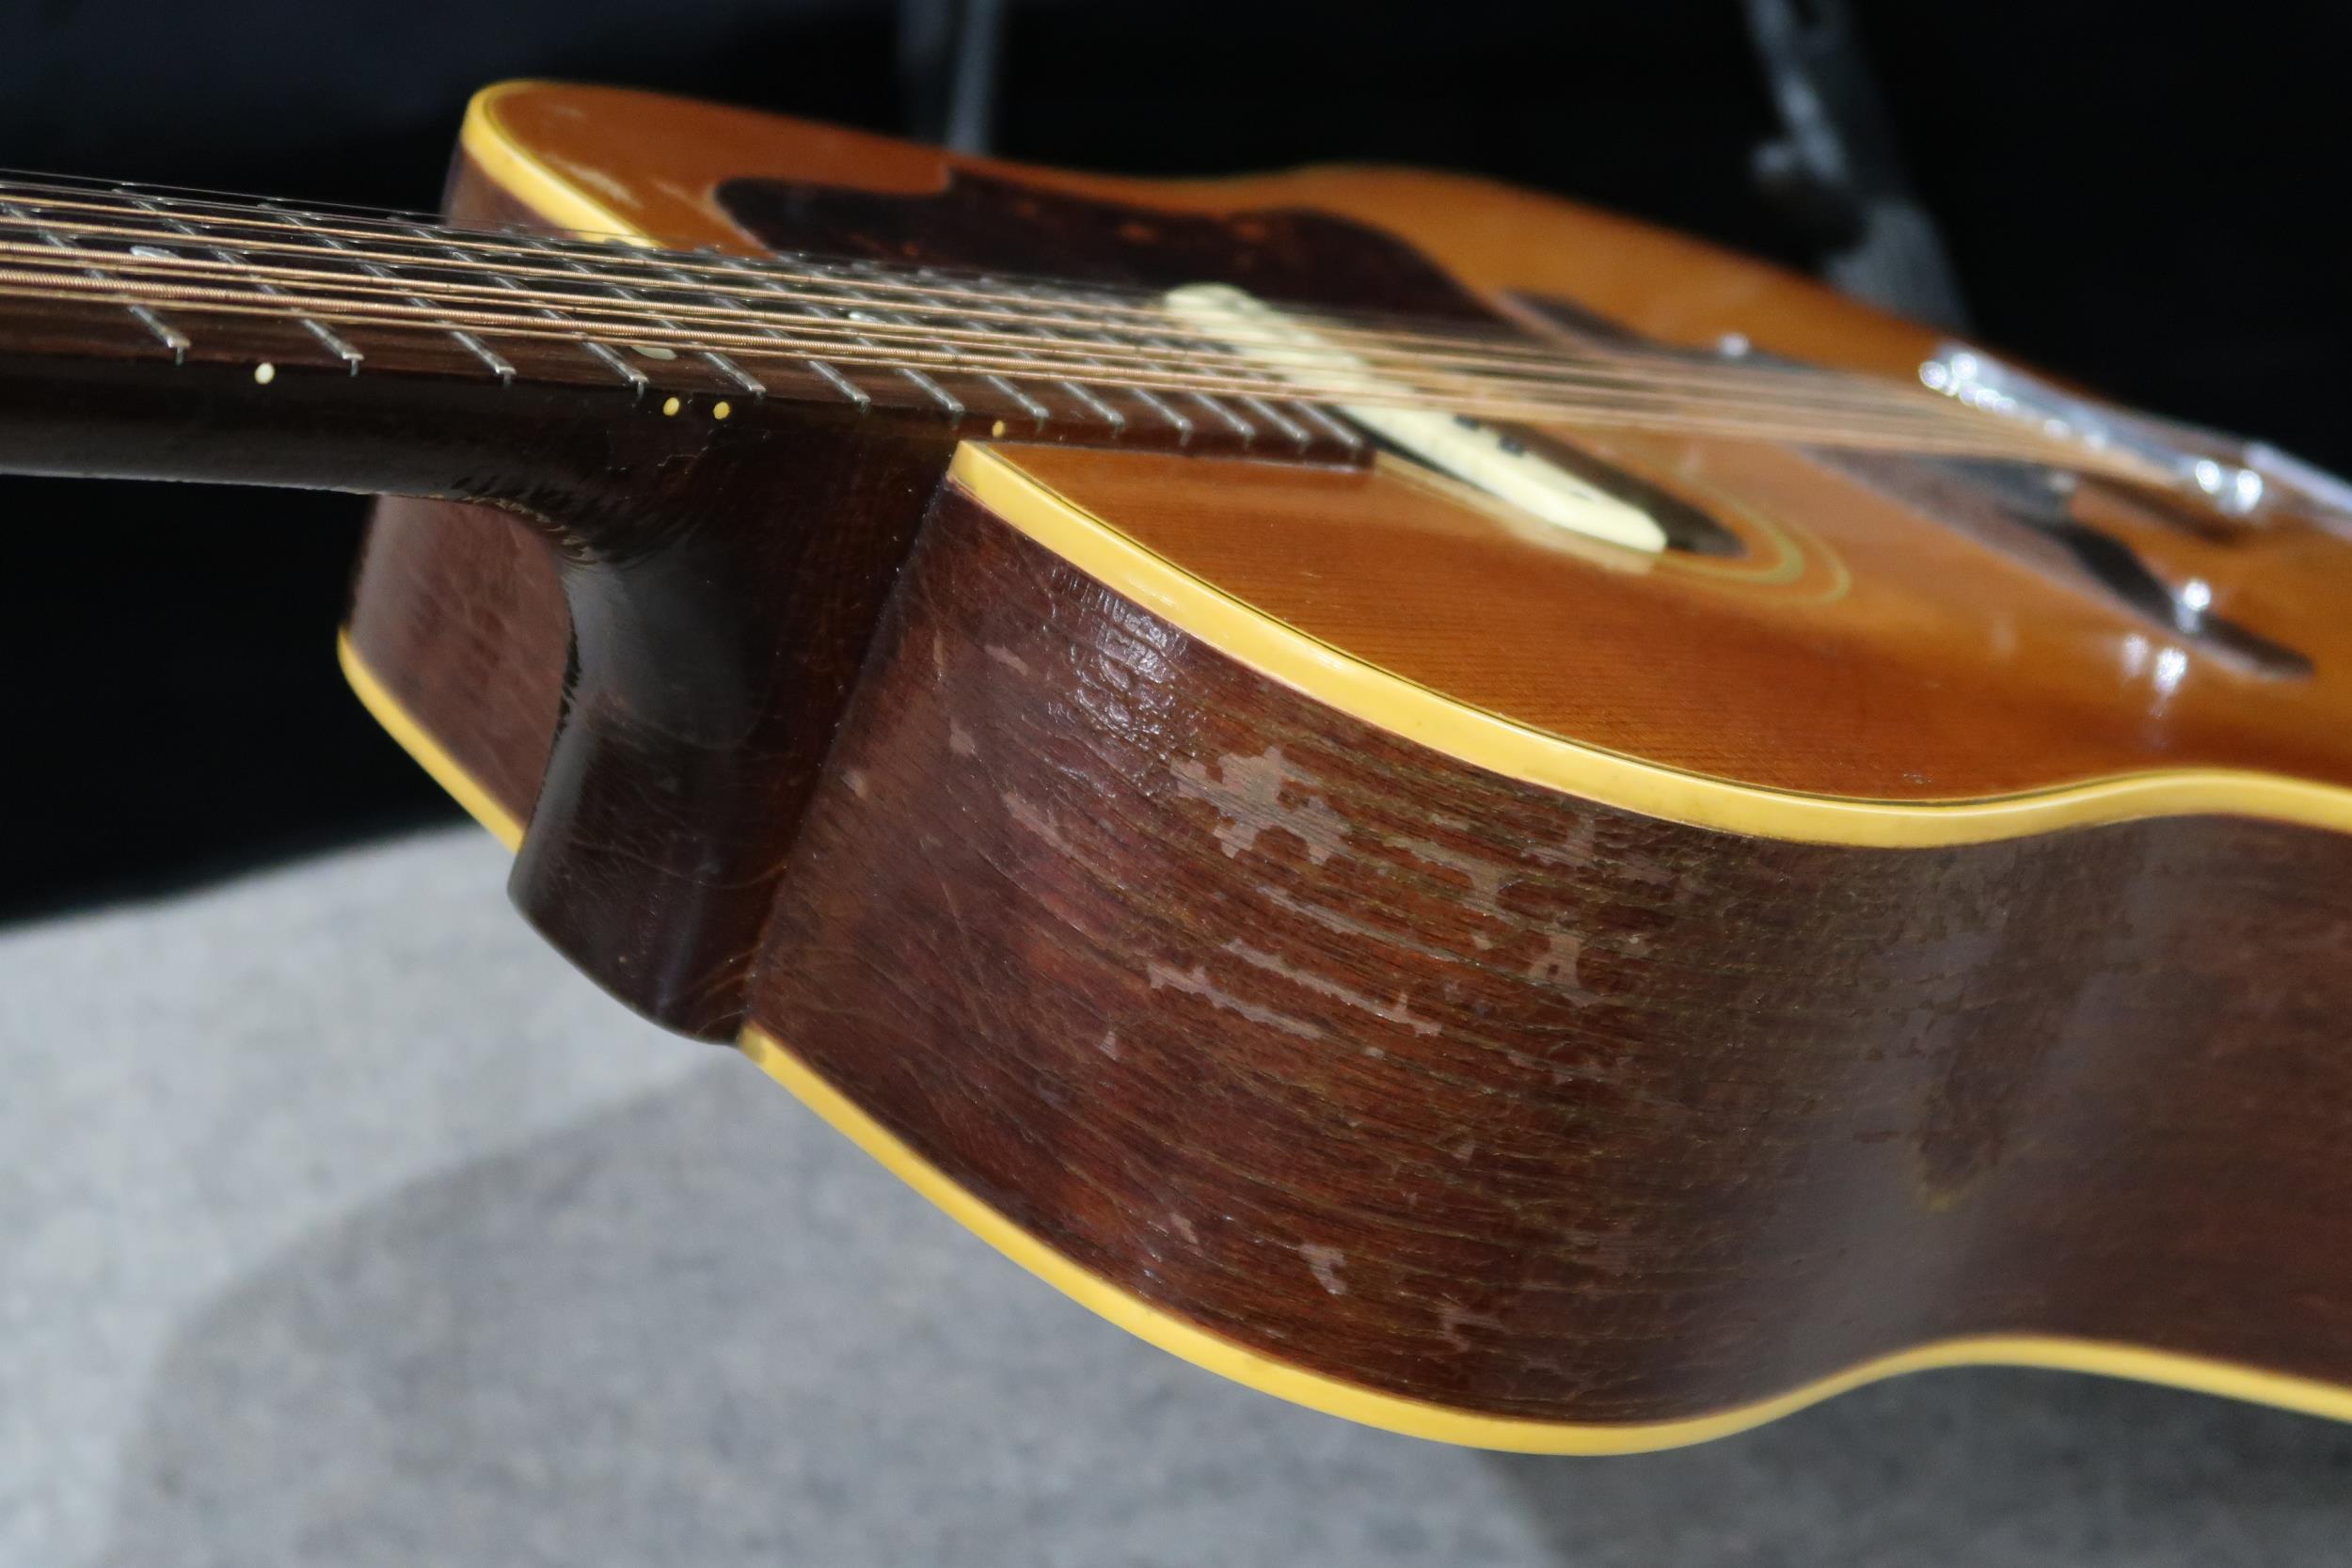 GIBSON A vintage 1960's Gibson B-45 12 string acoustic guitar with natural finish and  tortoise - Image 11 of 20